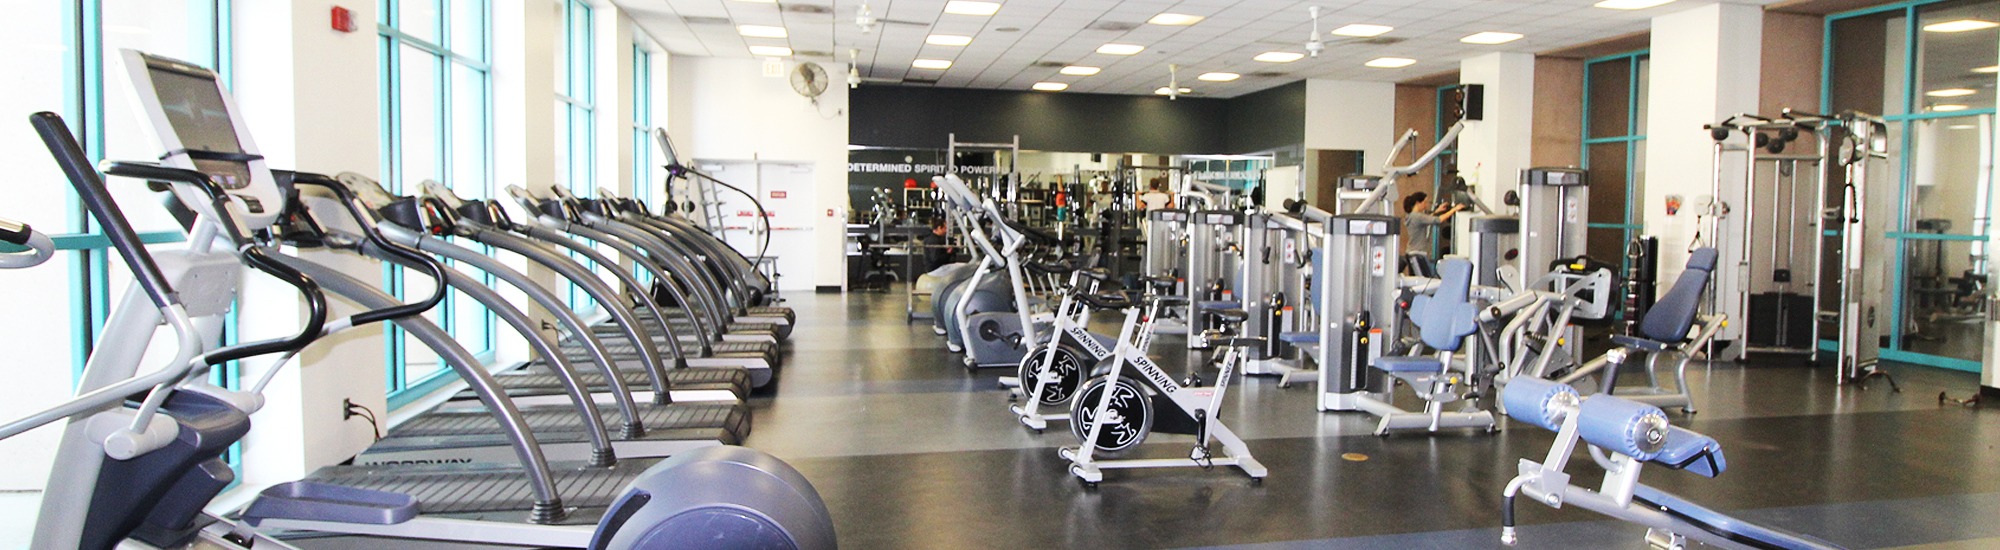 Smart Moves Studio at Campus Rec, UArizona, with a room full of fitness equipment